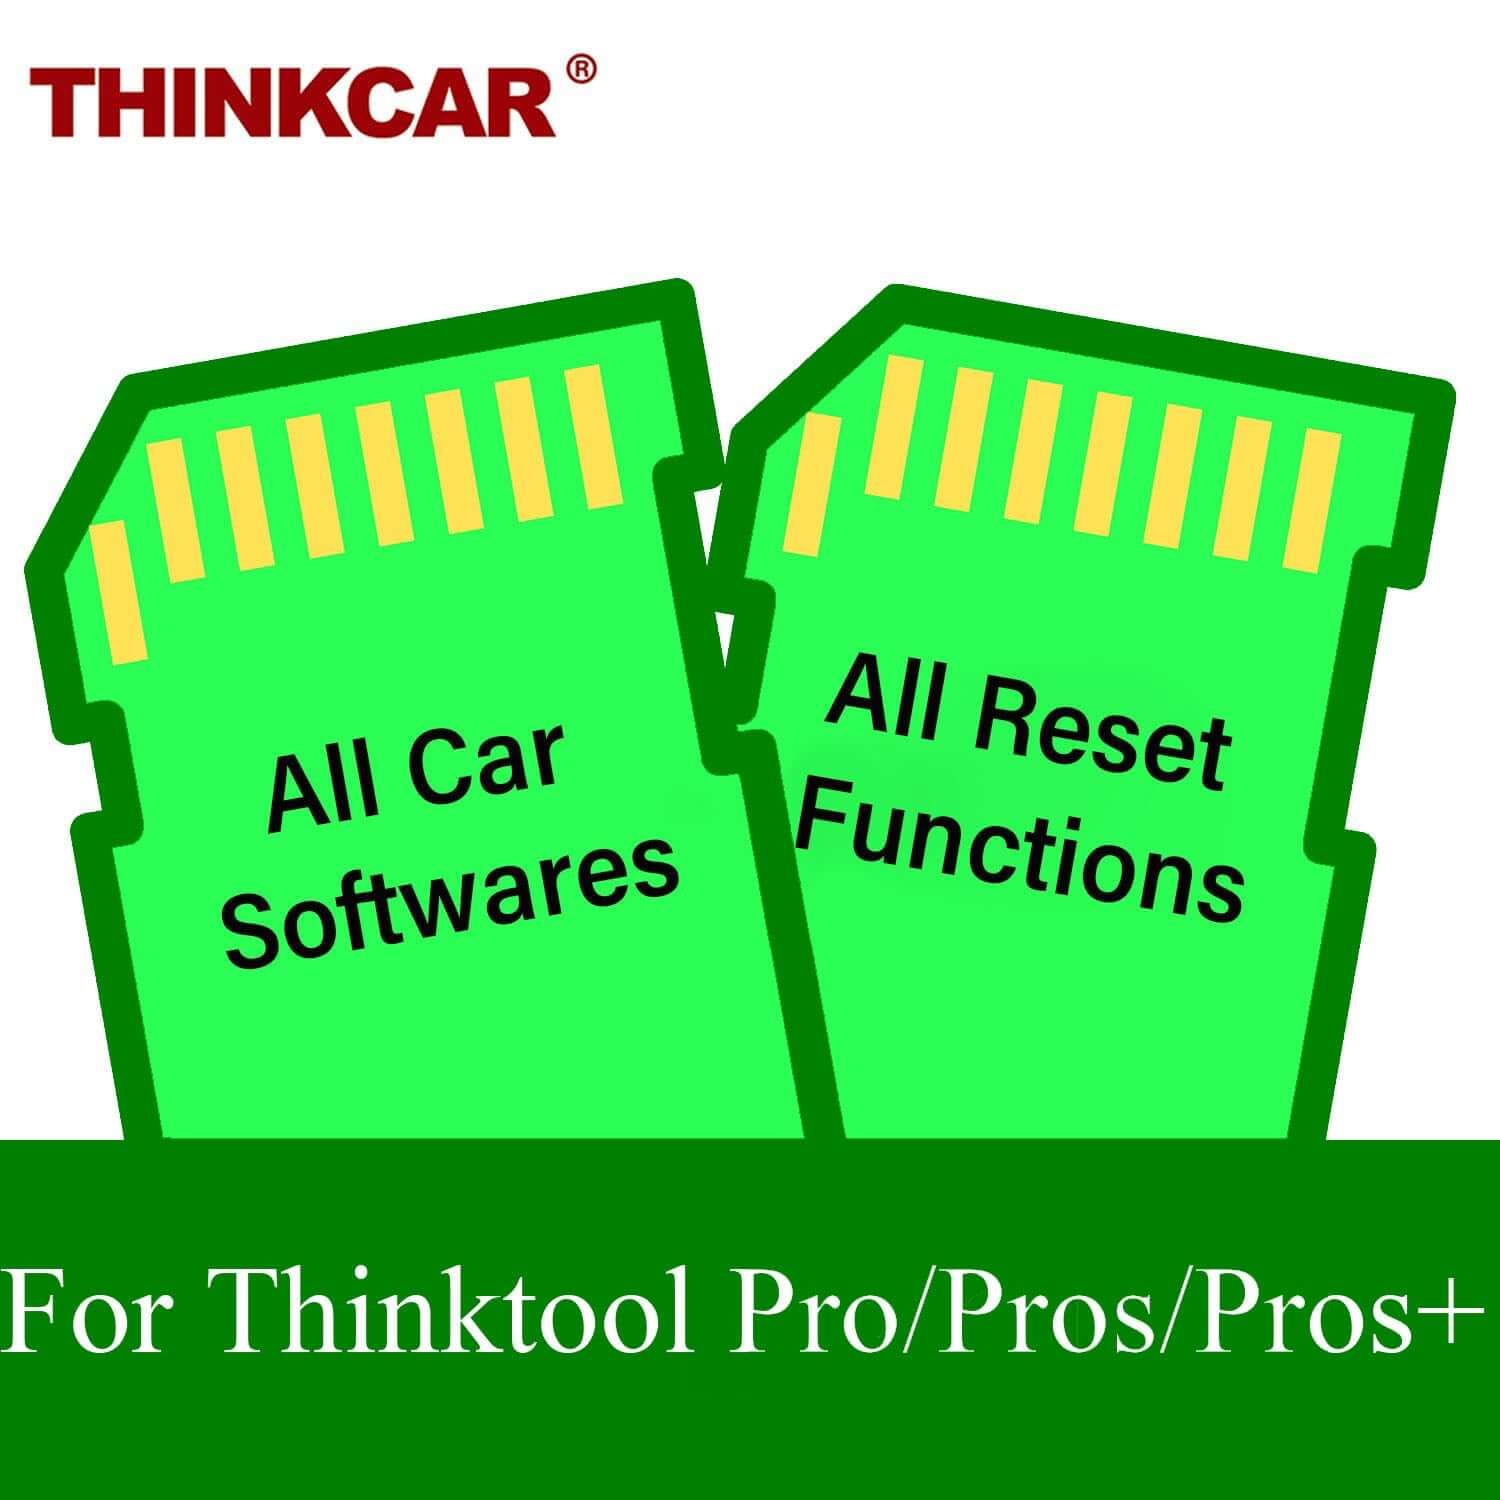 THINKCAR® Thinktool Pro/Pros/Pros+ All Softwares 1 Year Renewal Update